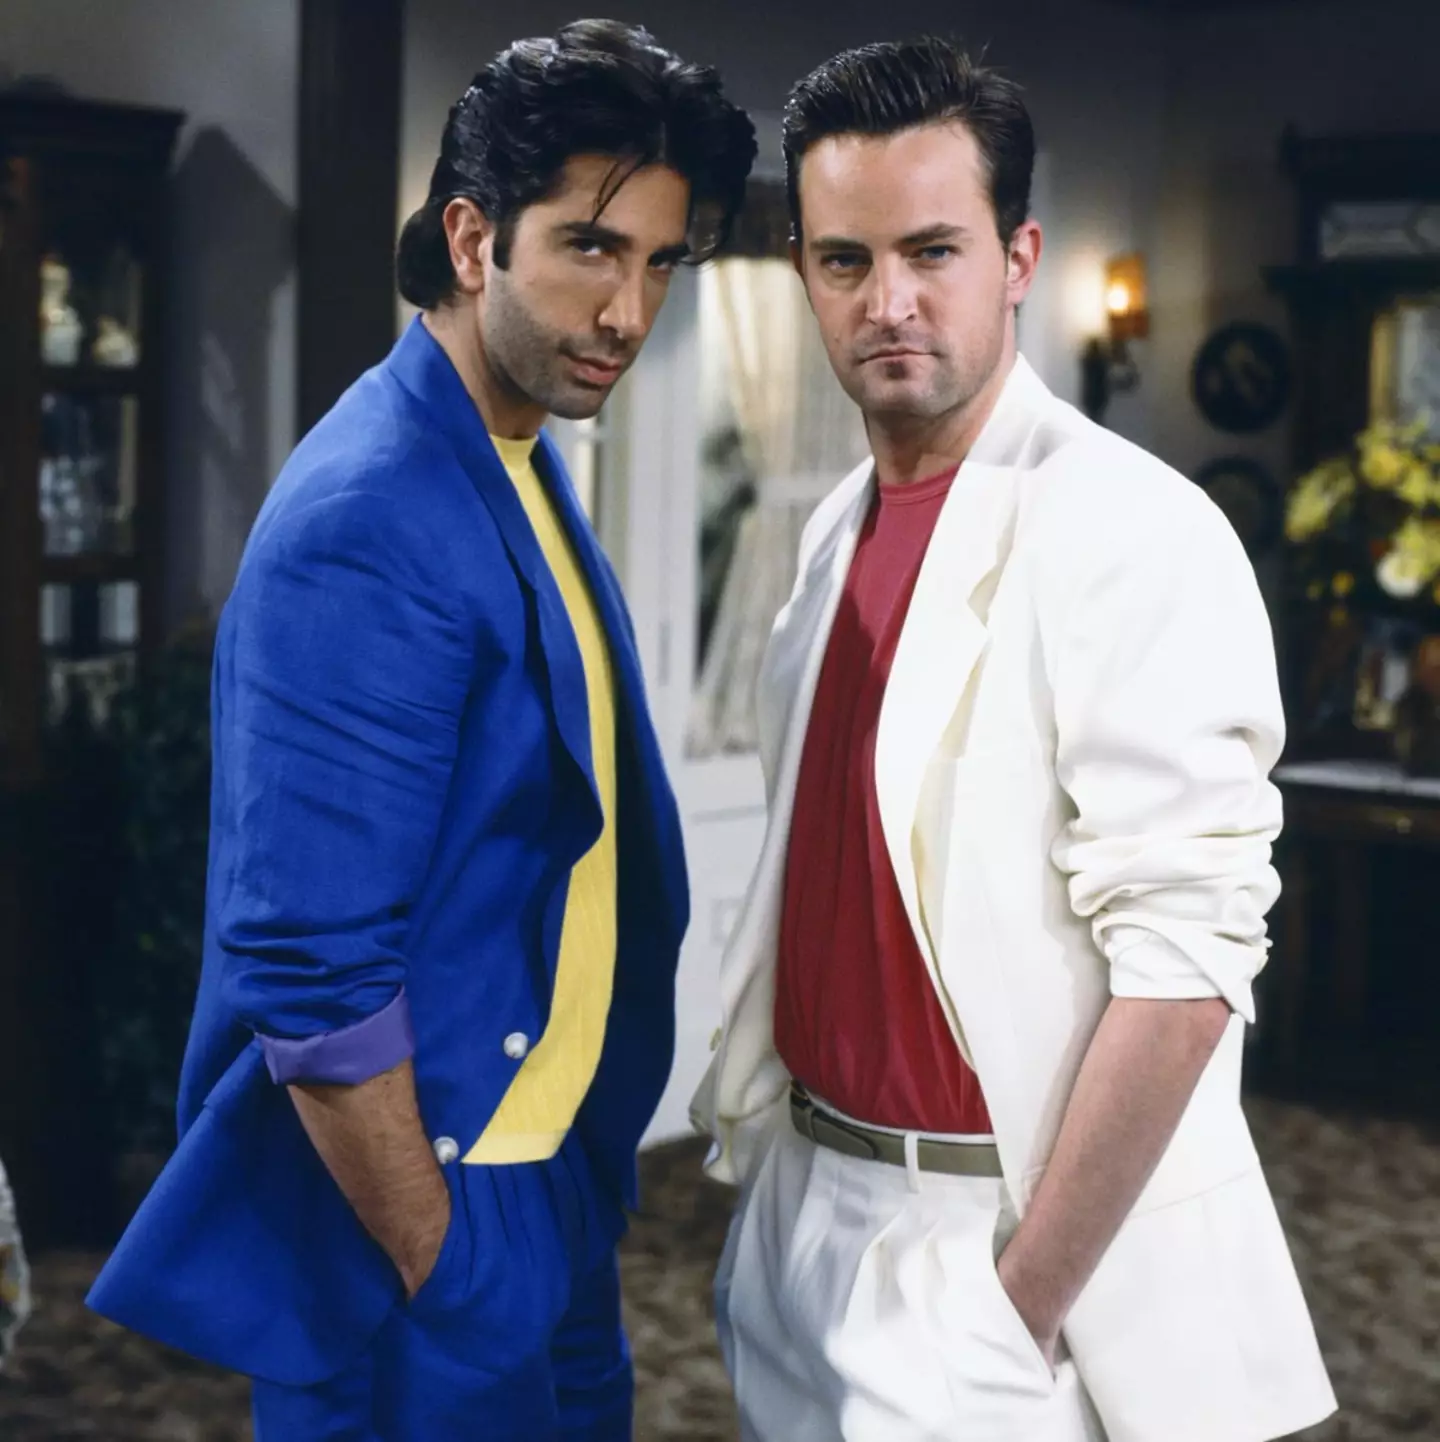 David Schwimmer and Matthew Perry on the set of Friends.